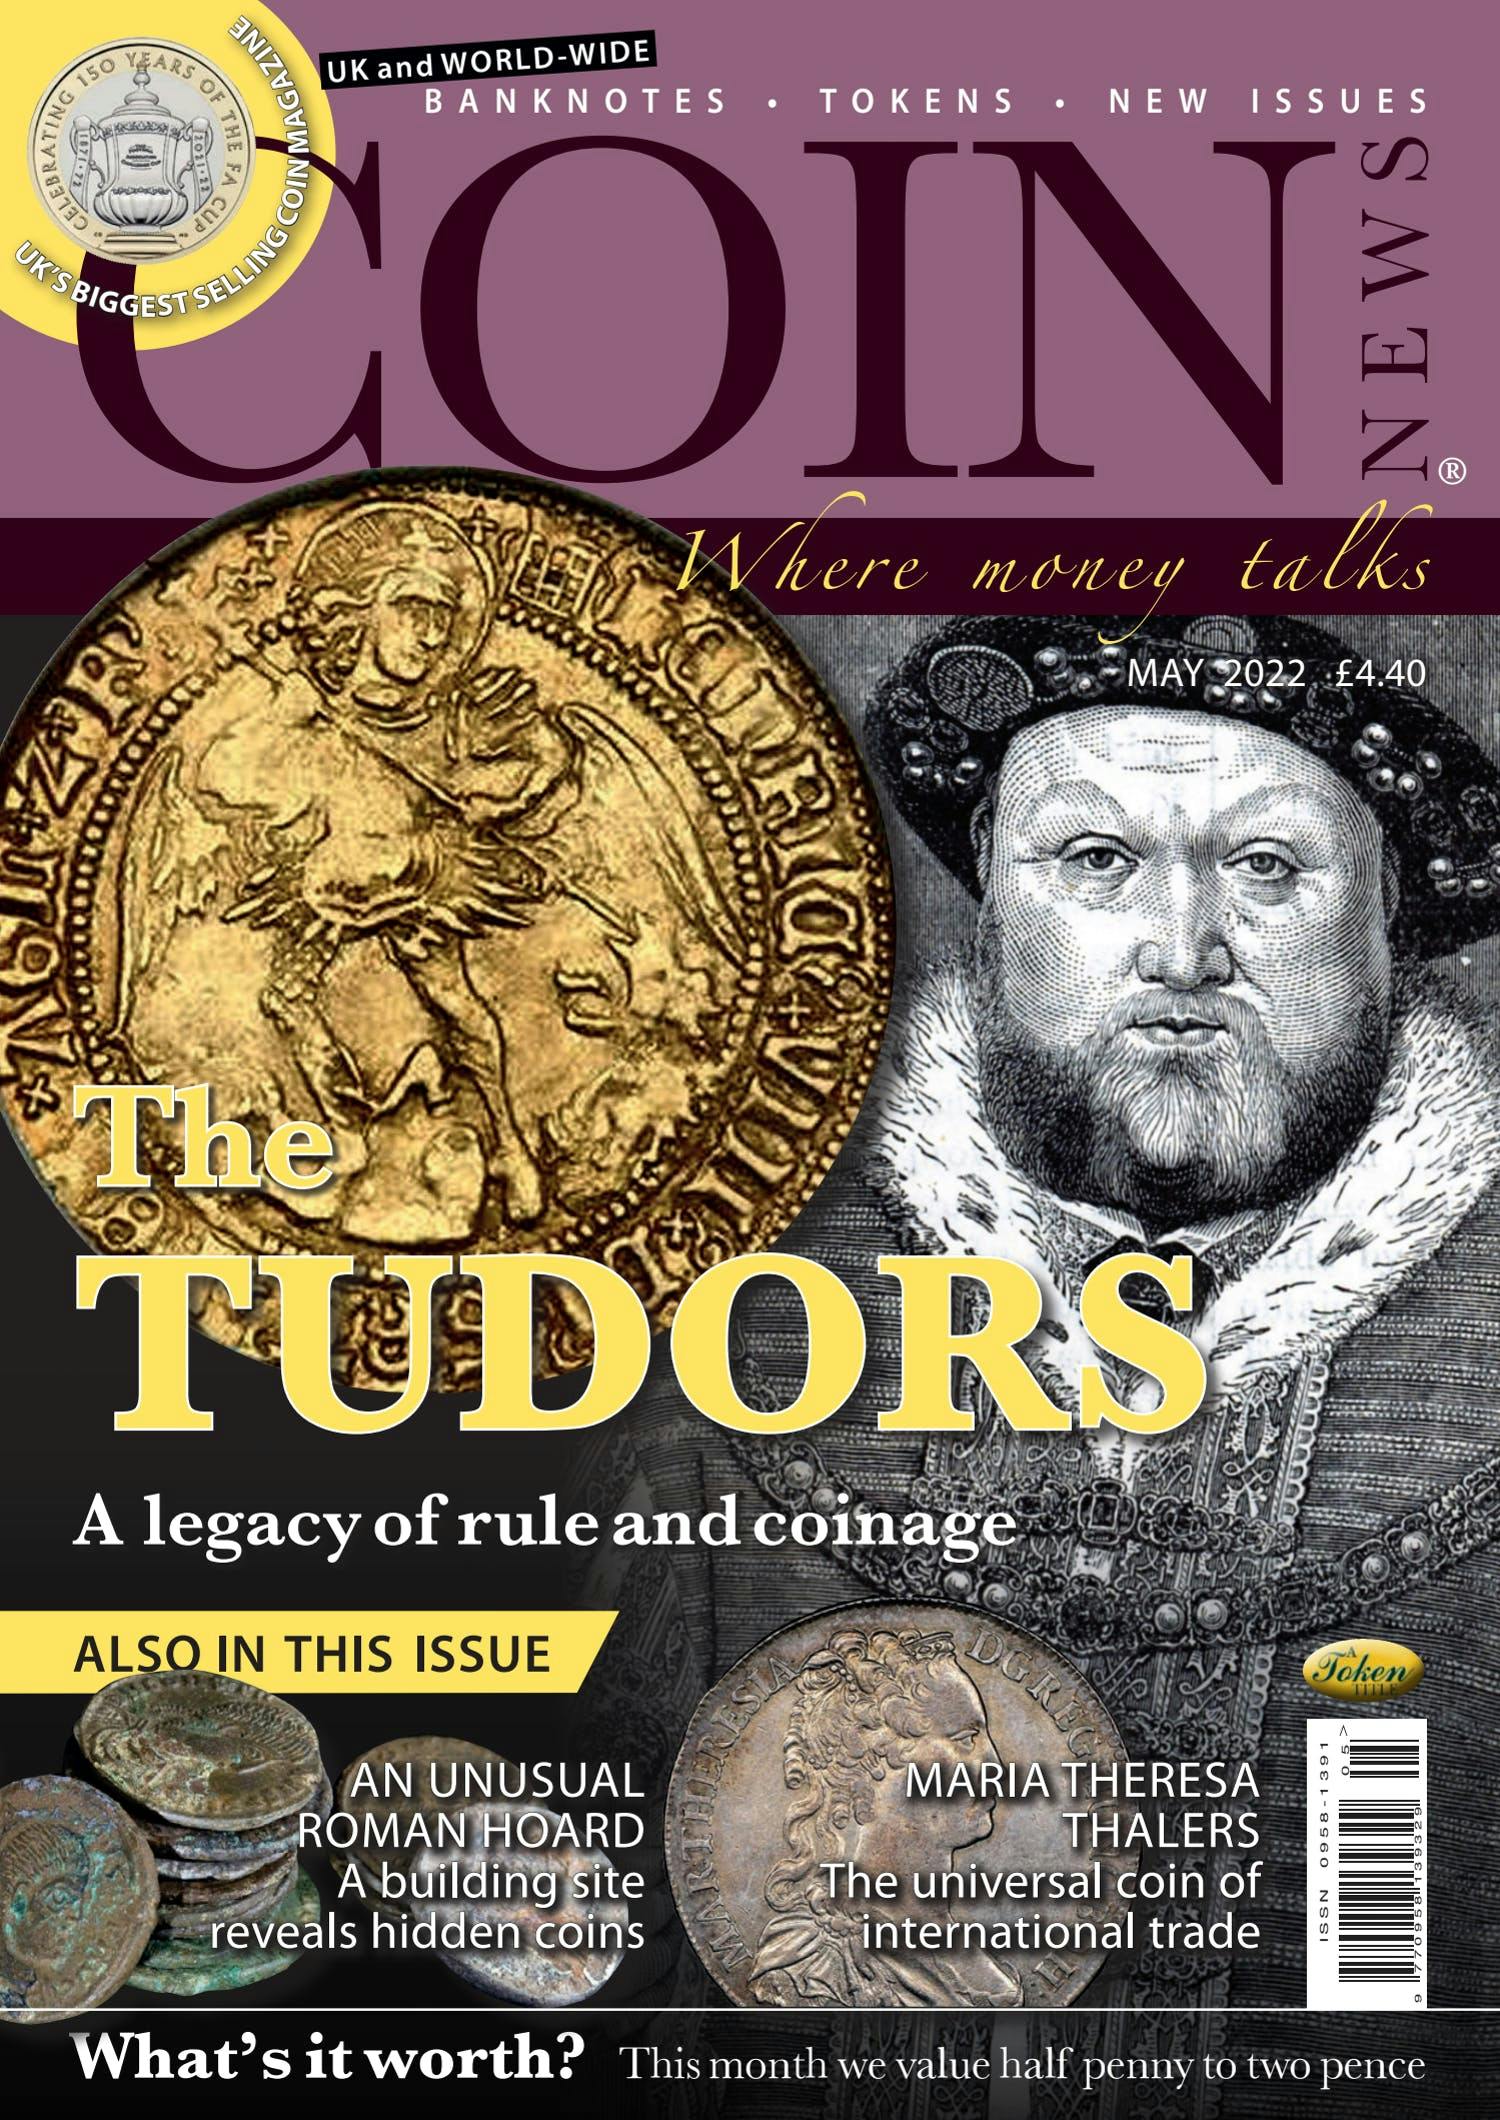 The front cover of Coin News, Volume 59, Number 5, May 2022